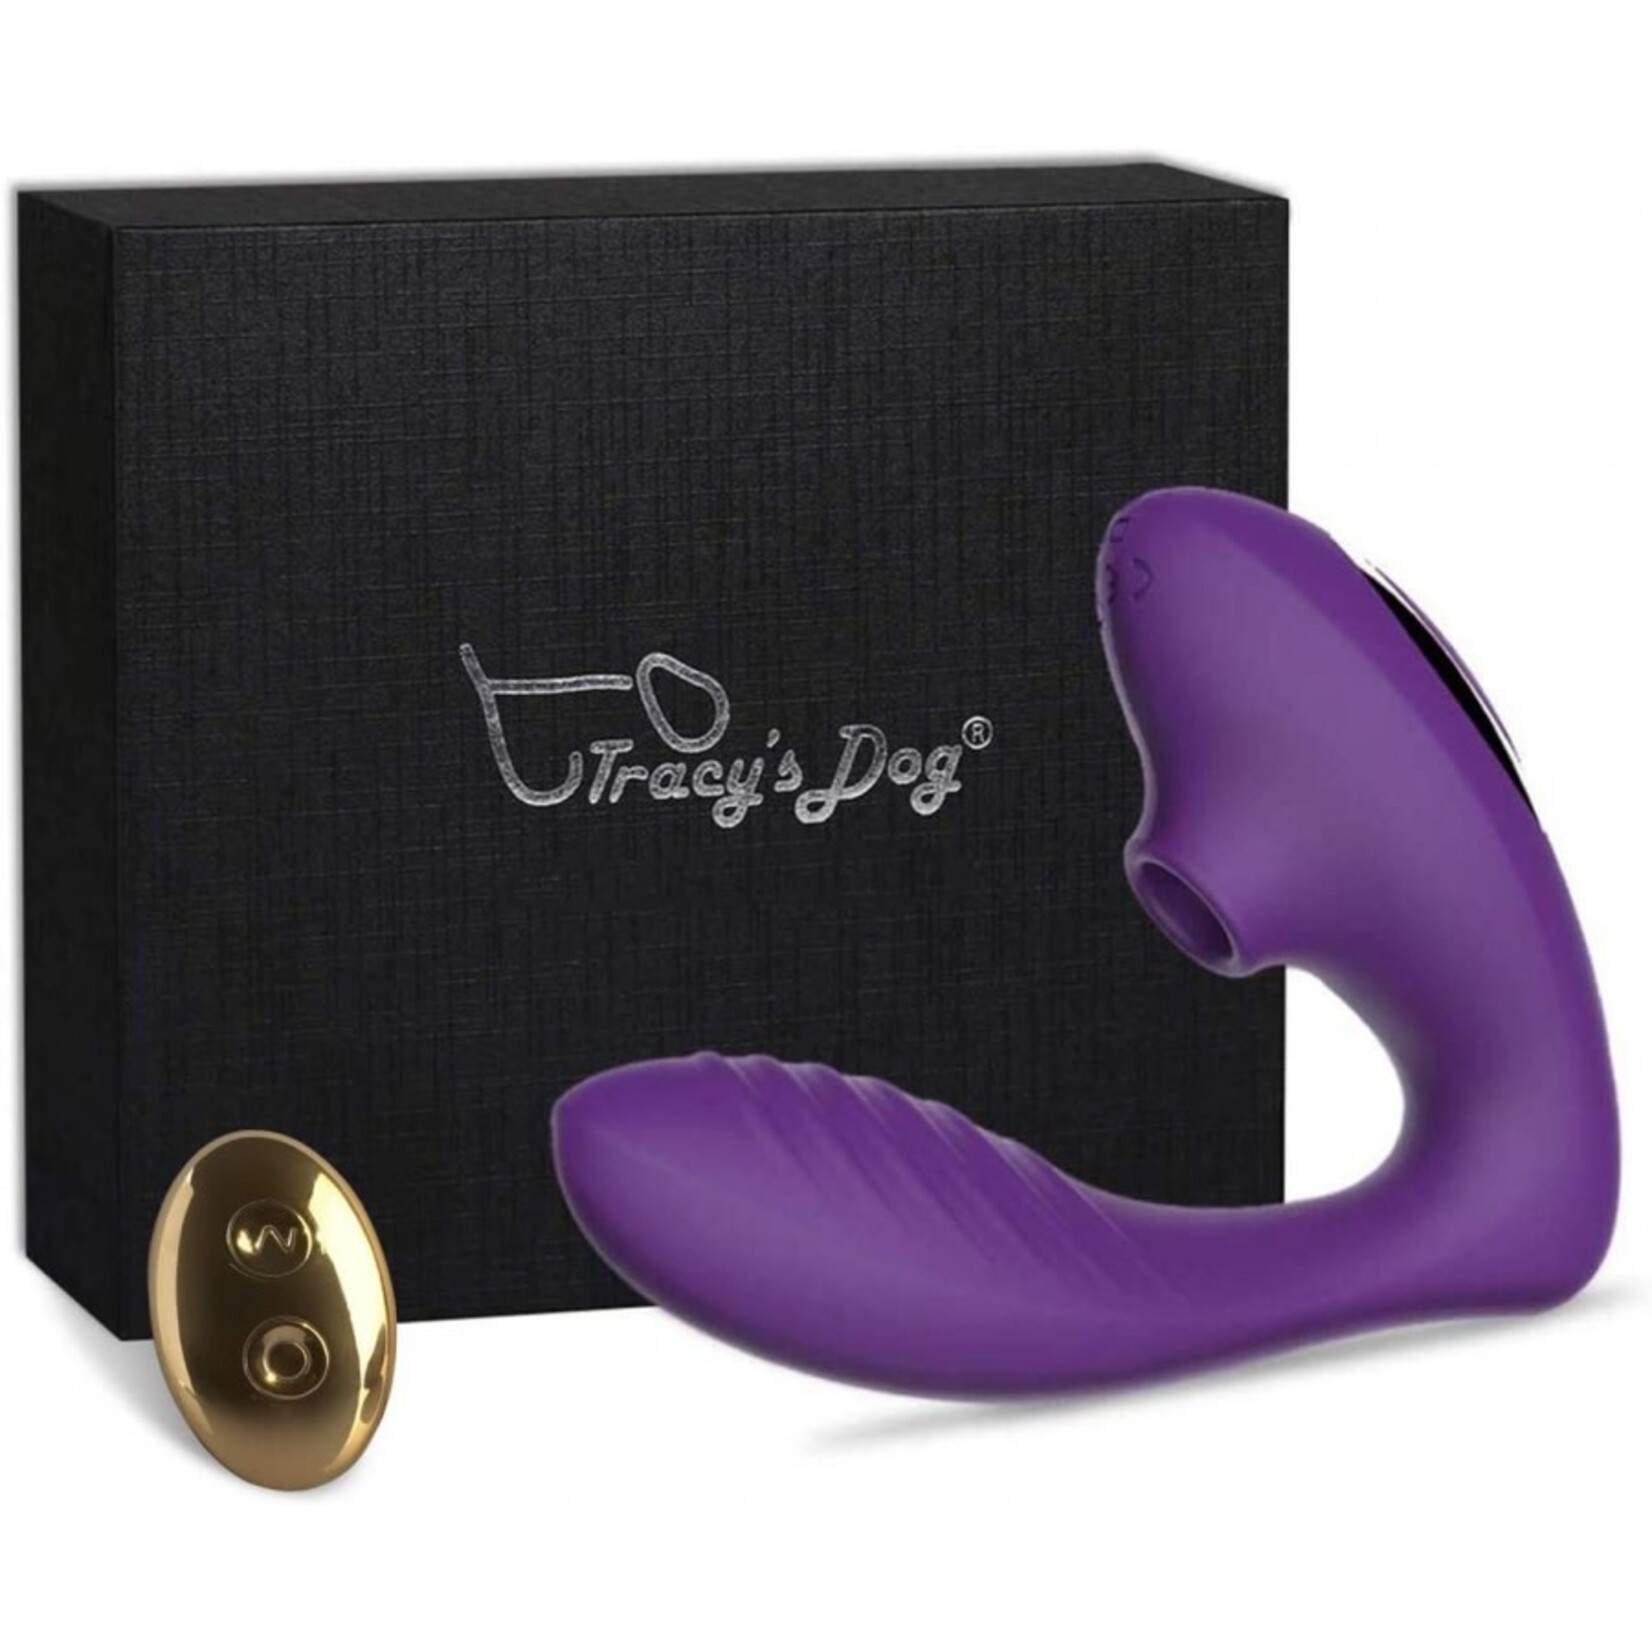 TRACY'S DOG TRACY'S DOG - OG CLITORAL SUCKING VIBRATOR WITH REMOTE - PURPLE - PRO 2